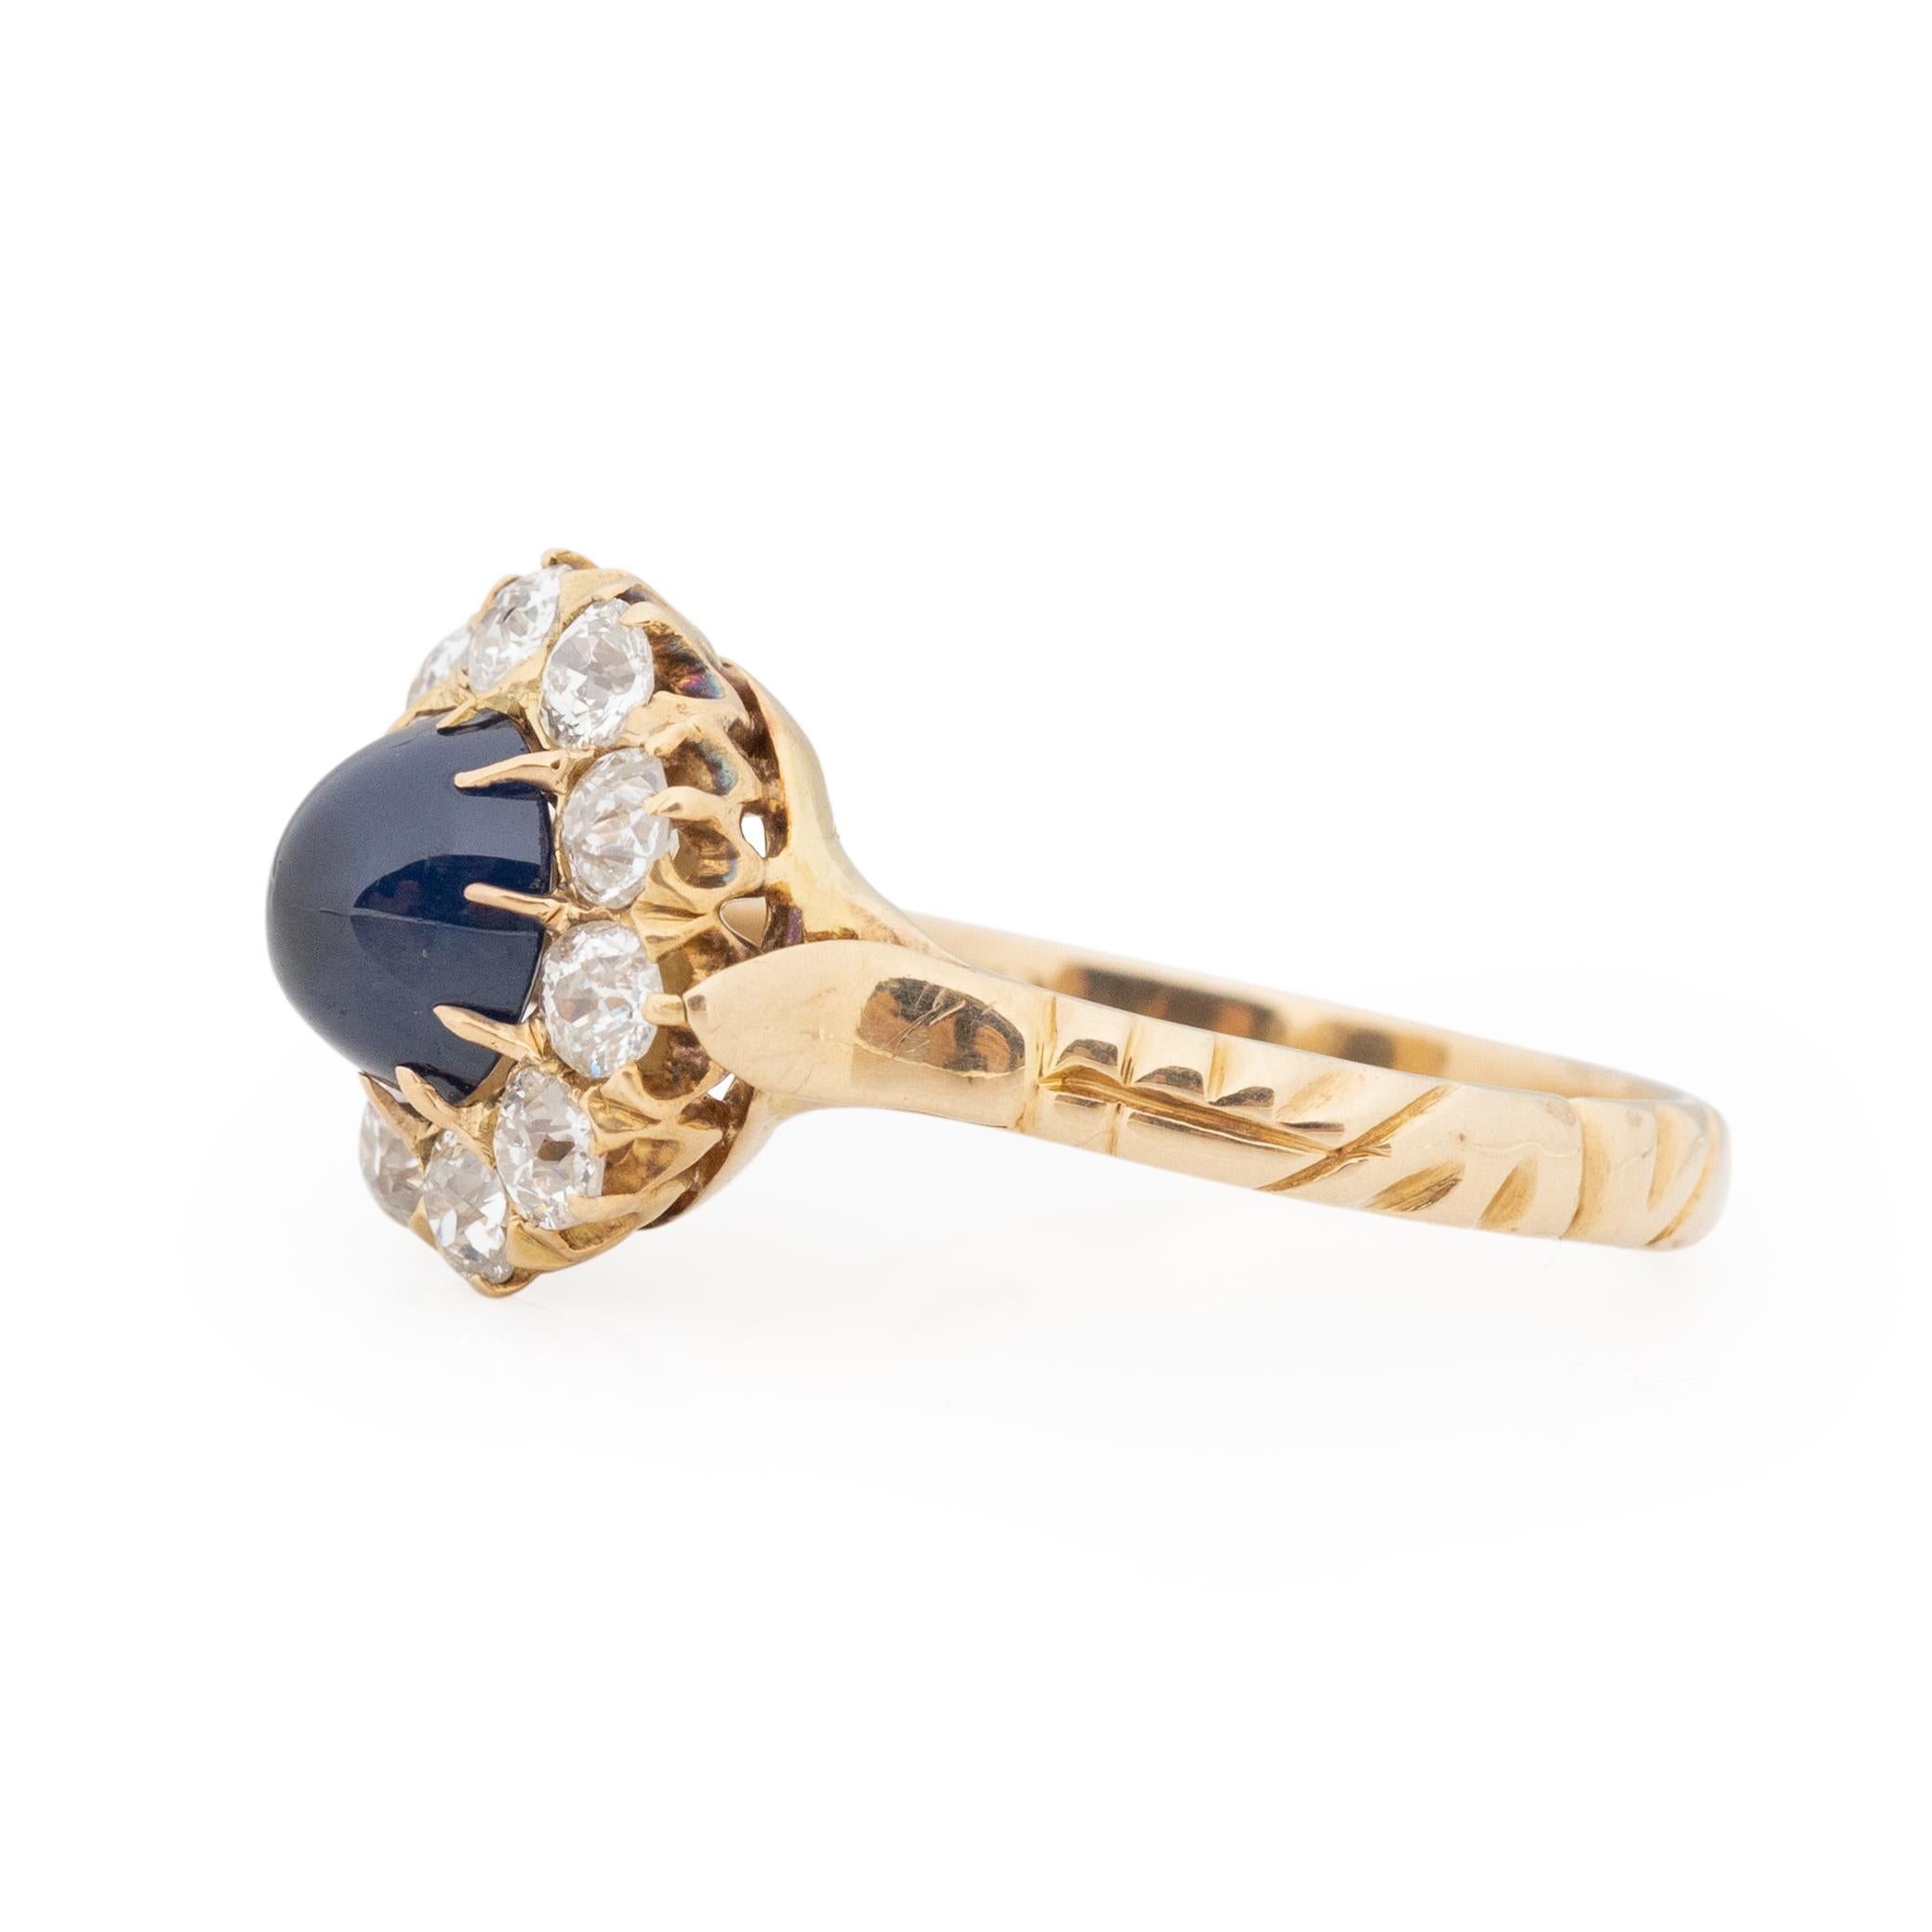 Sugarloaf Cabochon 14K Gold Blue Cambodian Cab Sapphire Diamond Halo Solitaire Ring 